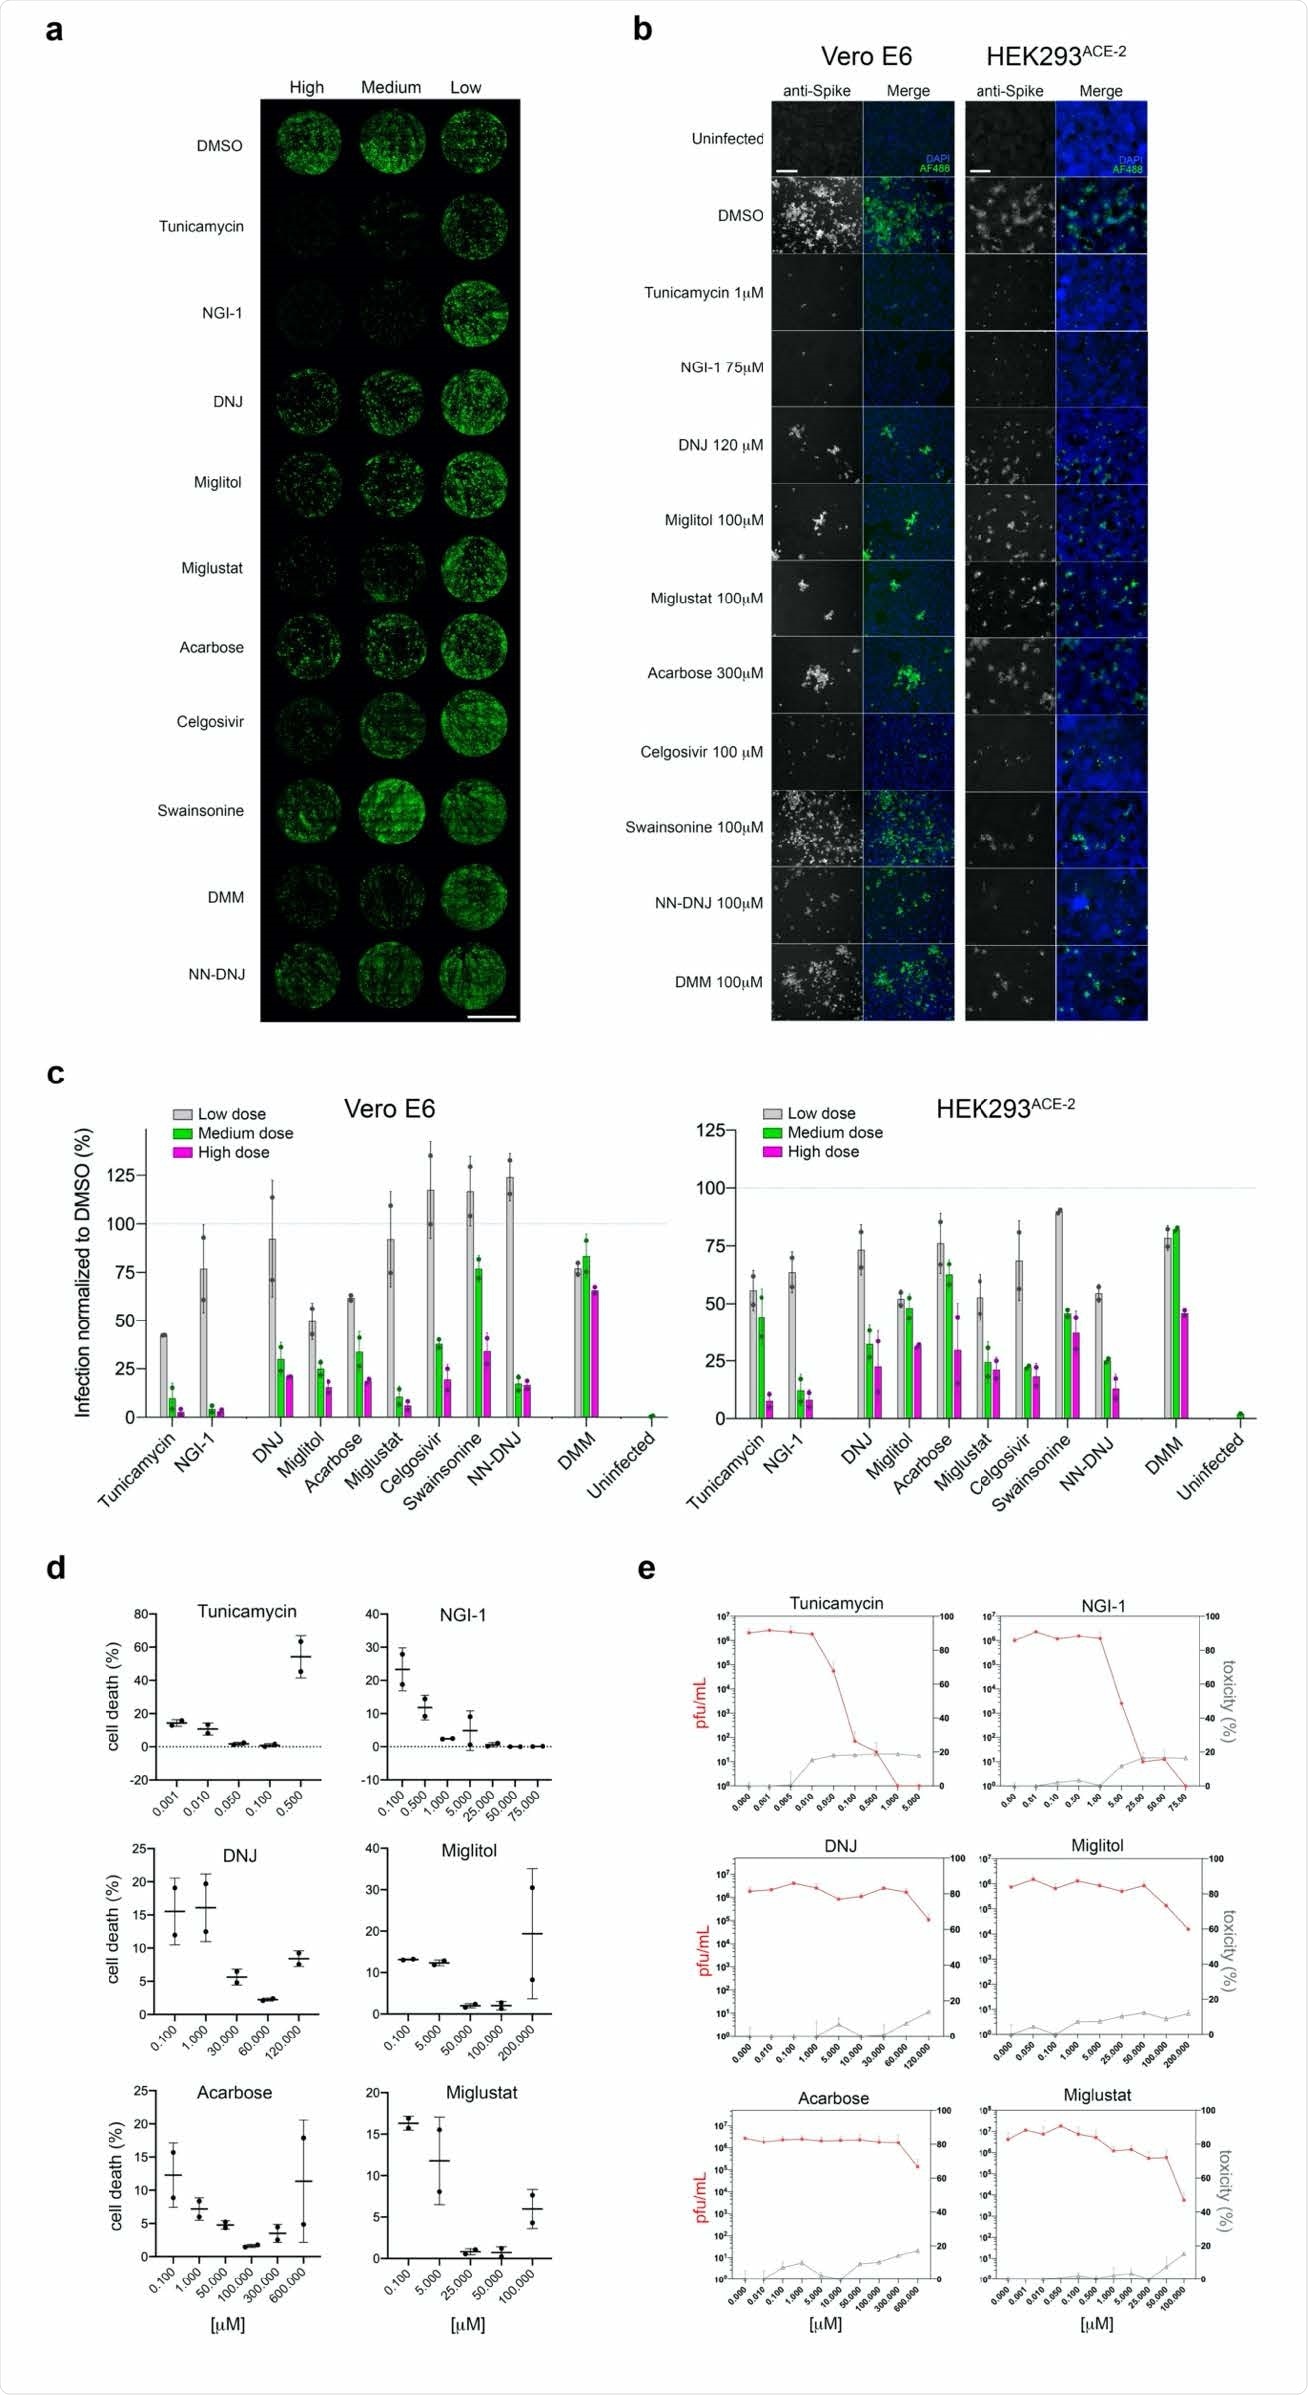 Genetic ablation of host N-glycosylation genes reduces SARS-CoV-2 infectivity. (a) Representative whole-well scans of confluent Vero E6 monolayers transfected either with siNT (negative control) or siRNAs for the knockdown of the N-glycosylation genes siSTT3-A, siSTT3-B, siSTT3A+B, siGANAB and siMGAT1, and infected with SARS-CoV-2 (MOI=0.05, 24 hours). Cells immunostained with anti-spike antibodies (green), counterstained with DAPI (purple) and merged; scale bar 5 mm. (b) Representative images of either Vero E6 or HEK293ACE-2 242 siRNA cells infected with SARS-CoV-2 (MOI=0.05 for 24 hours for Vero;